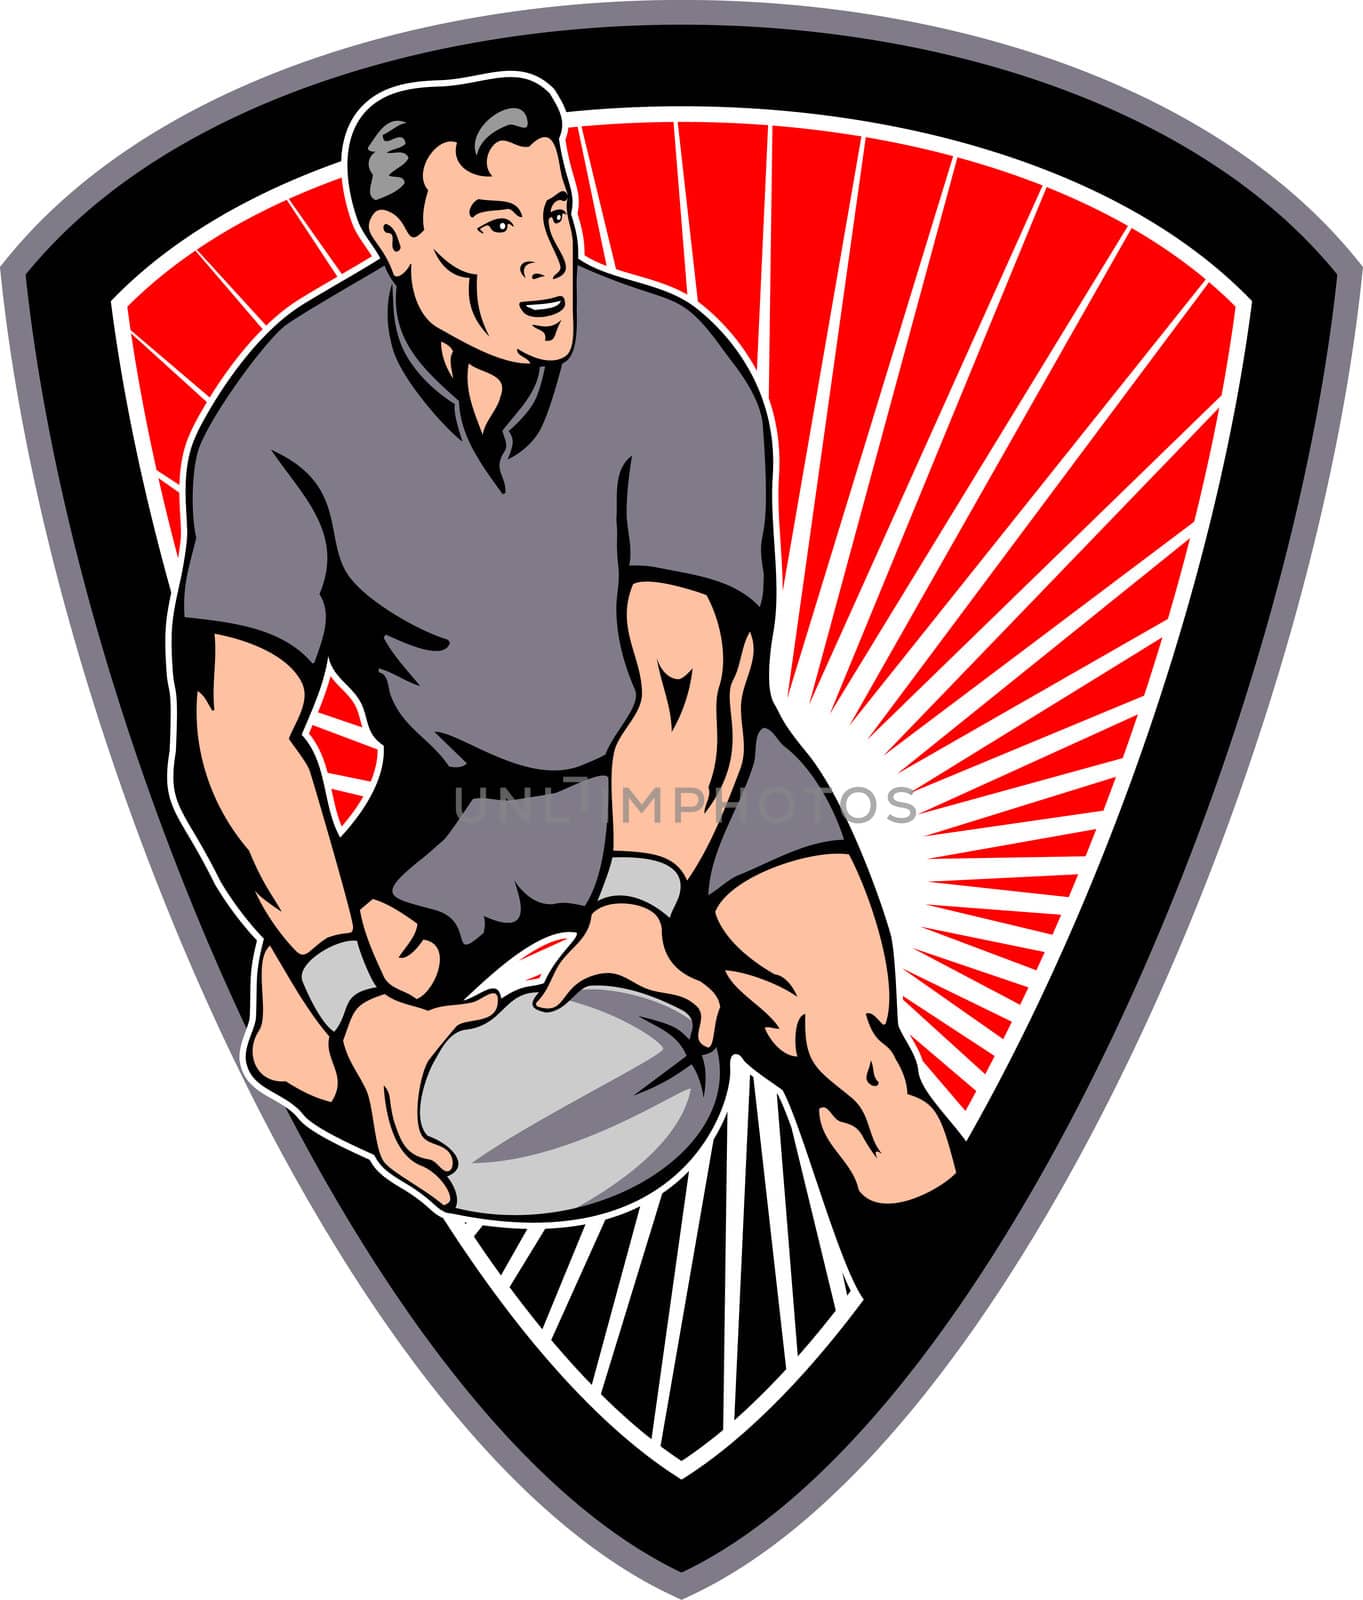 retro style illustration of a rugby player passing ball viewed from front with shield in background 